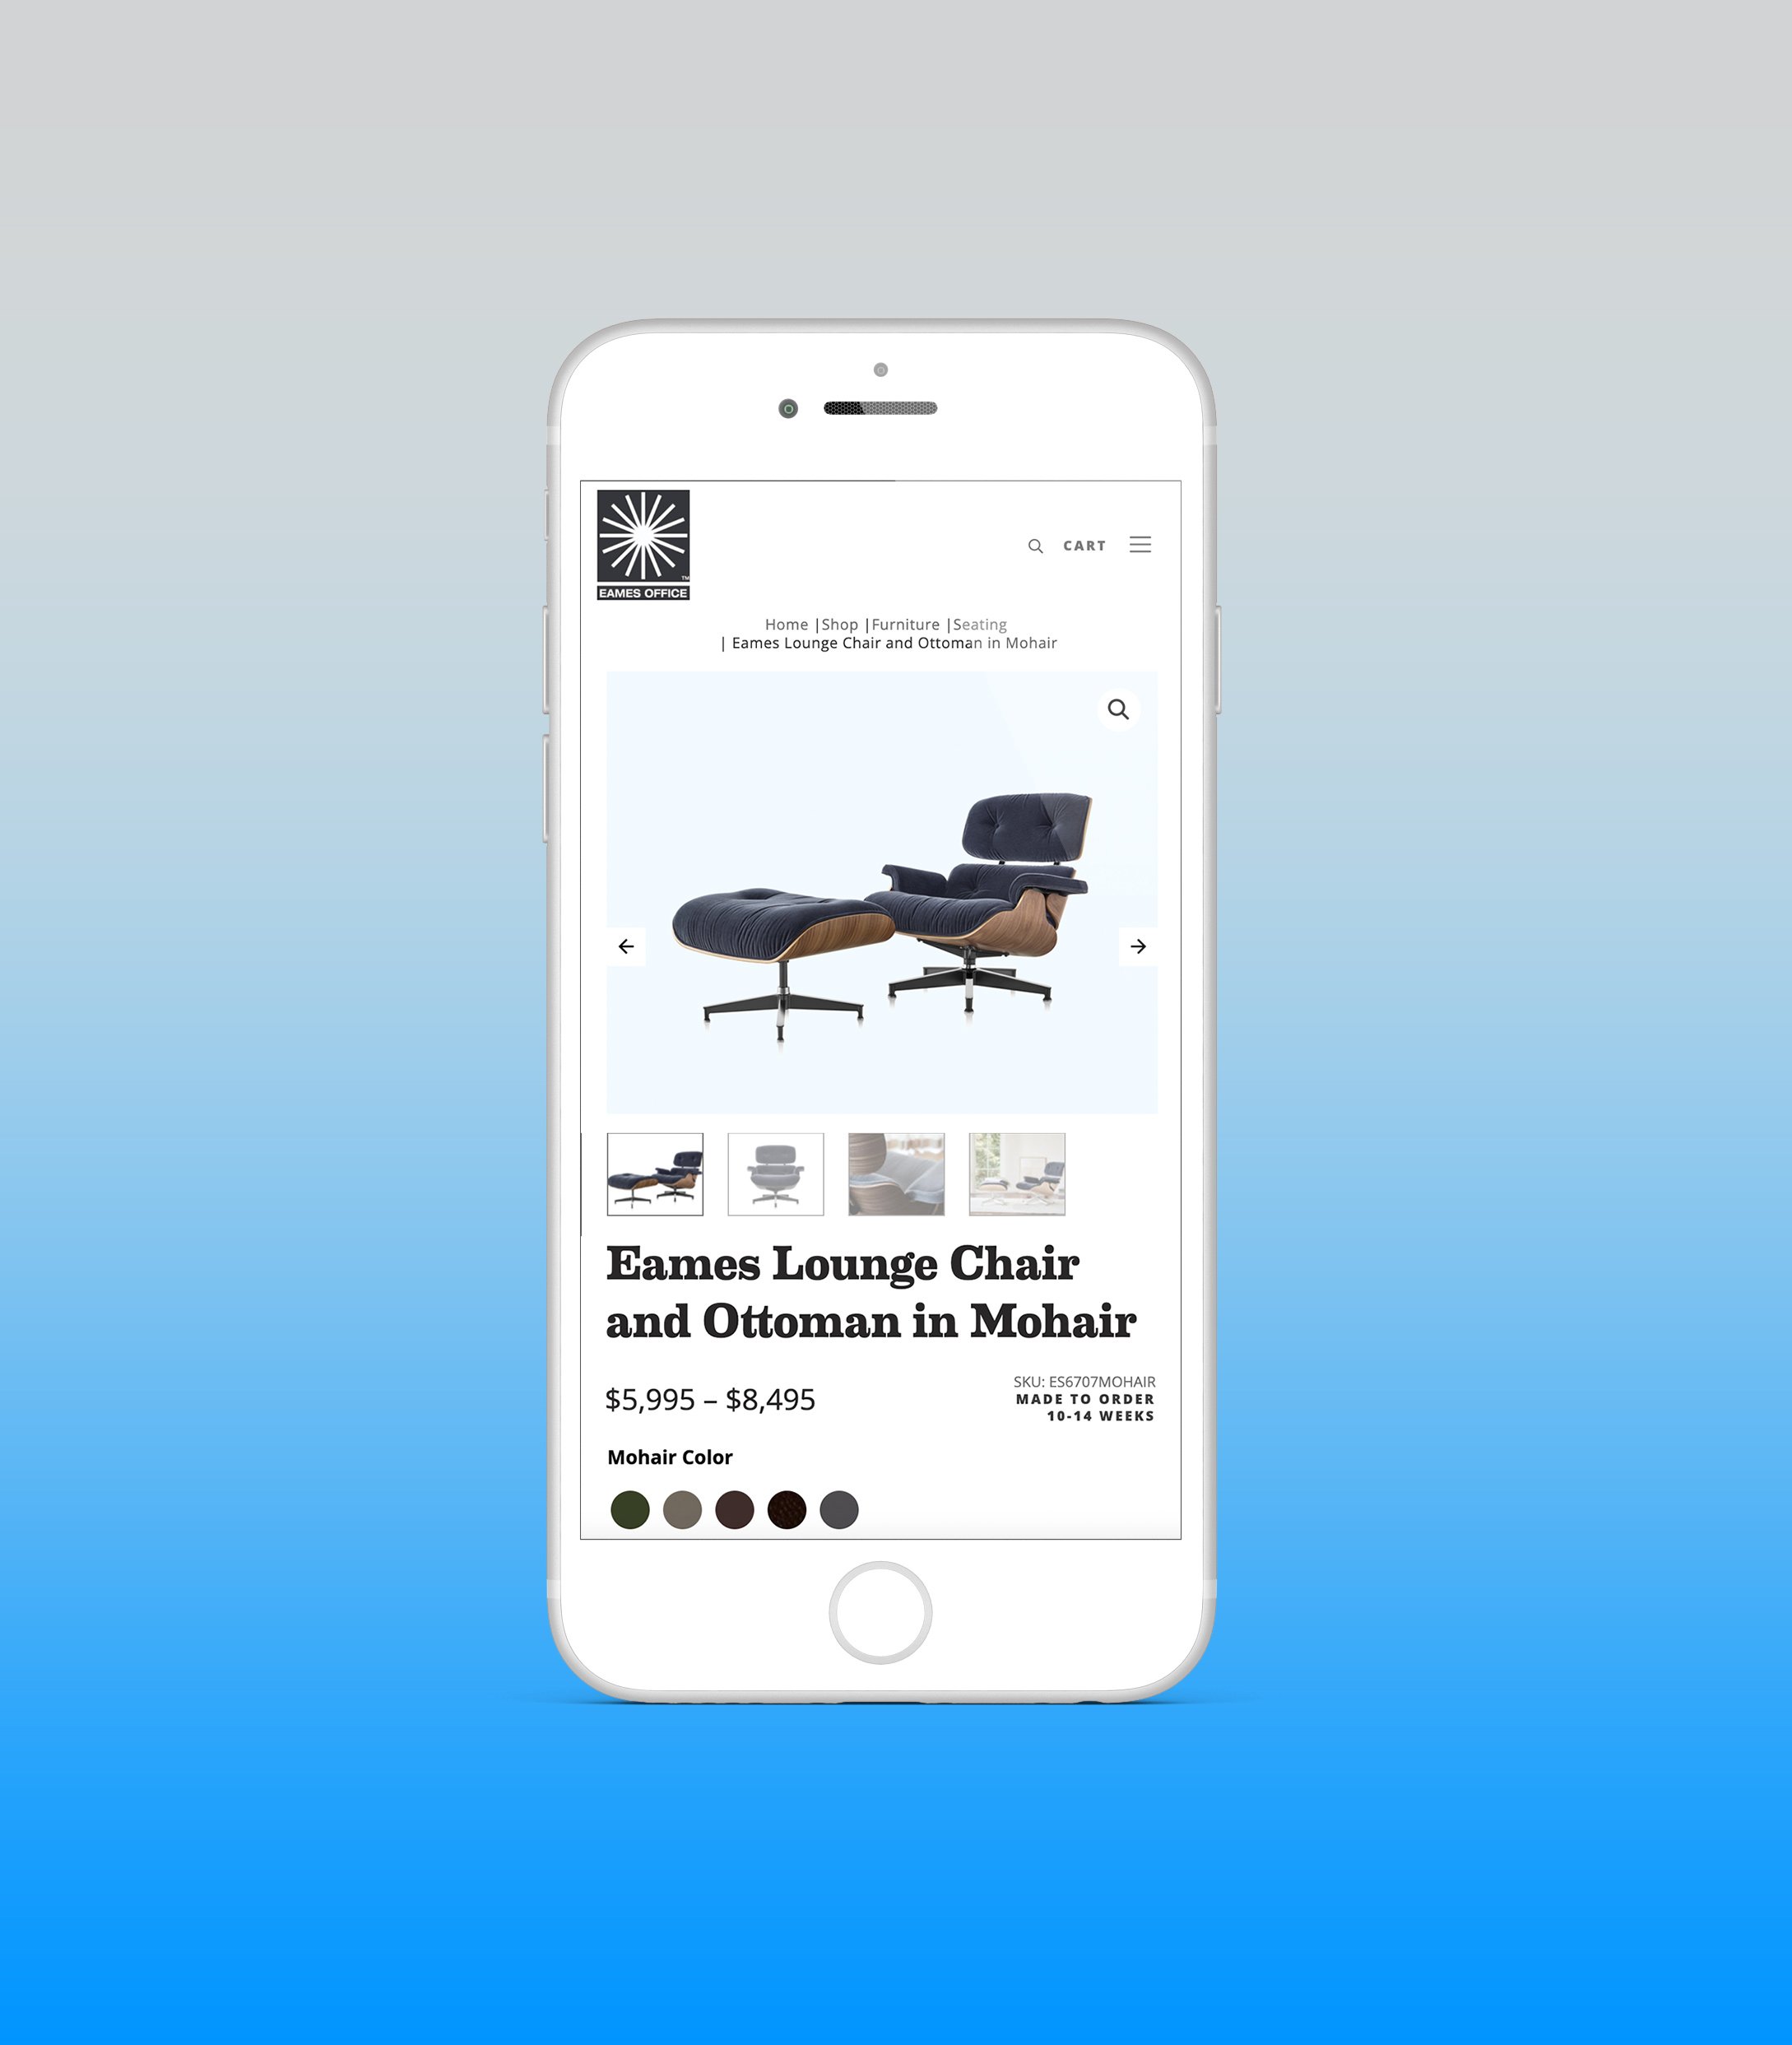 Emaes office chair product page on iPhone